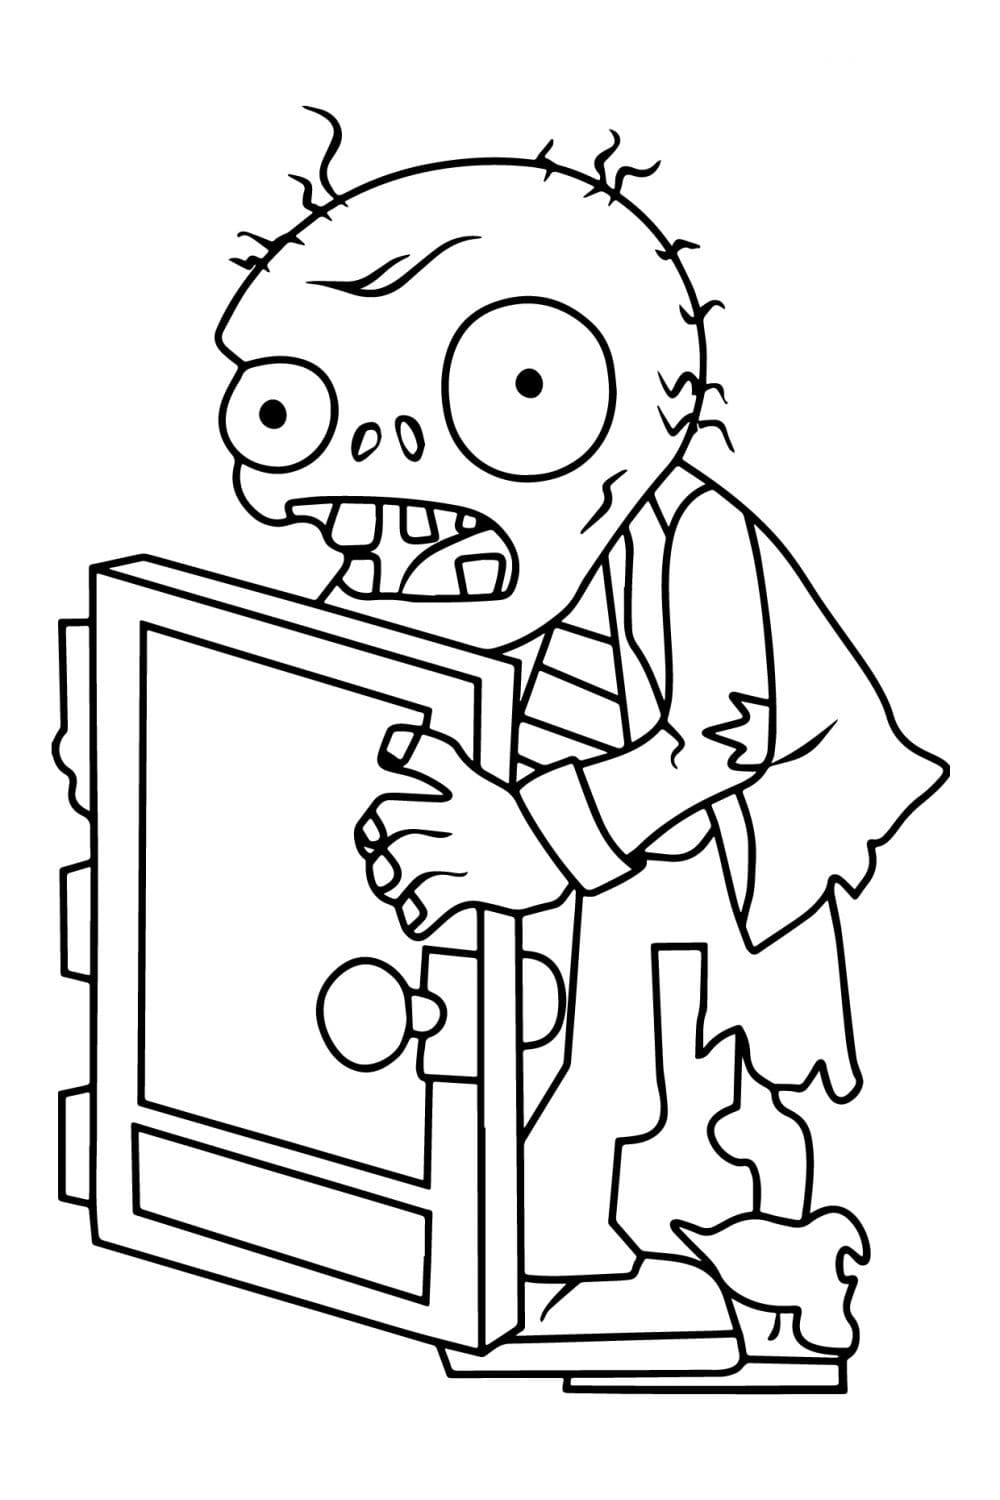 Coloring page Zombies Zombies with a door in their hands